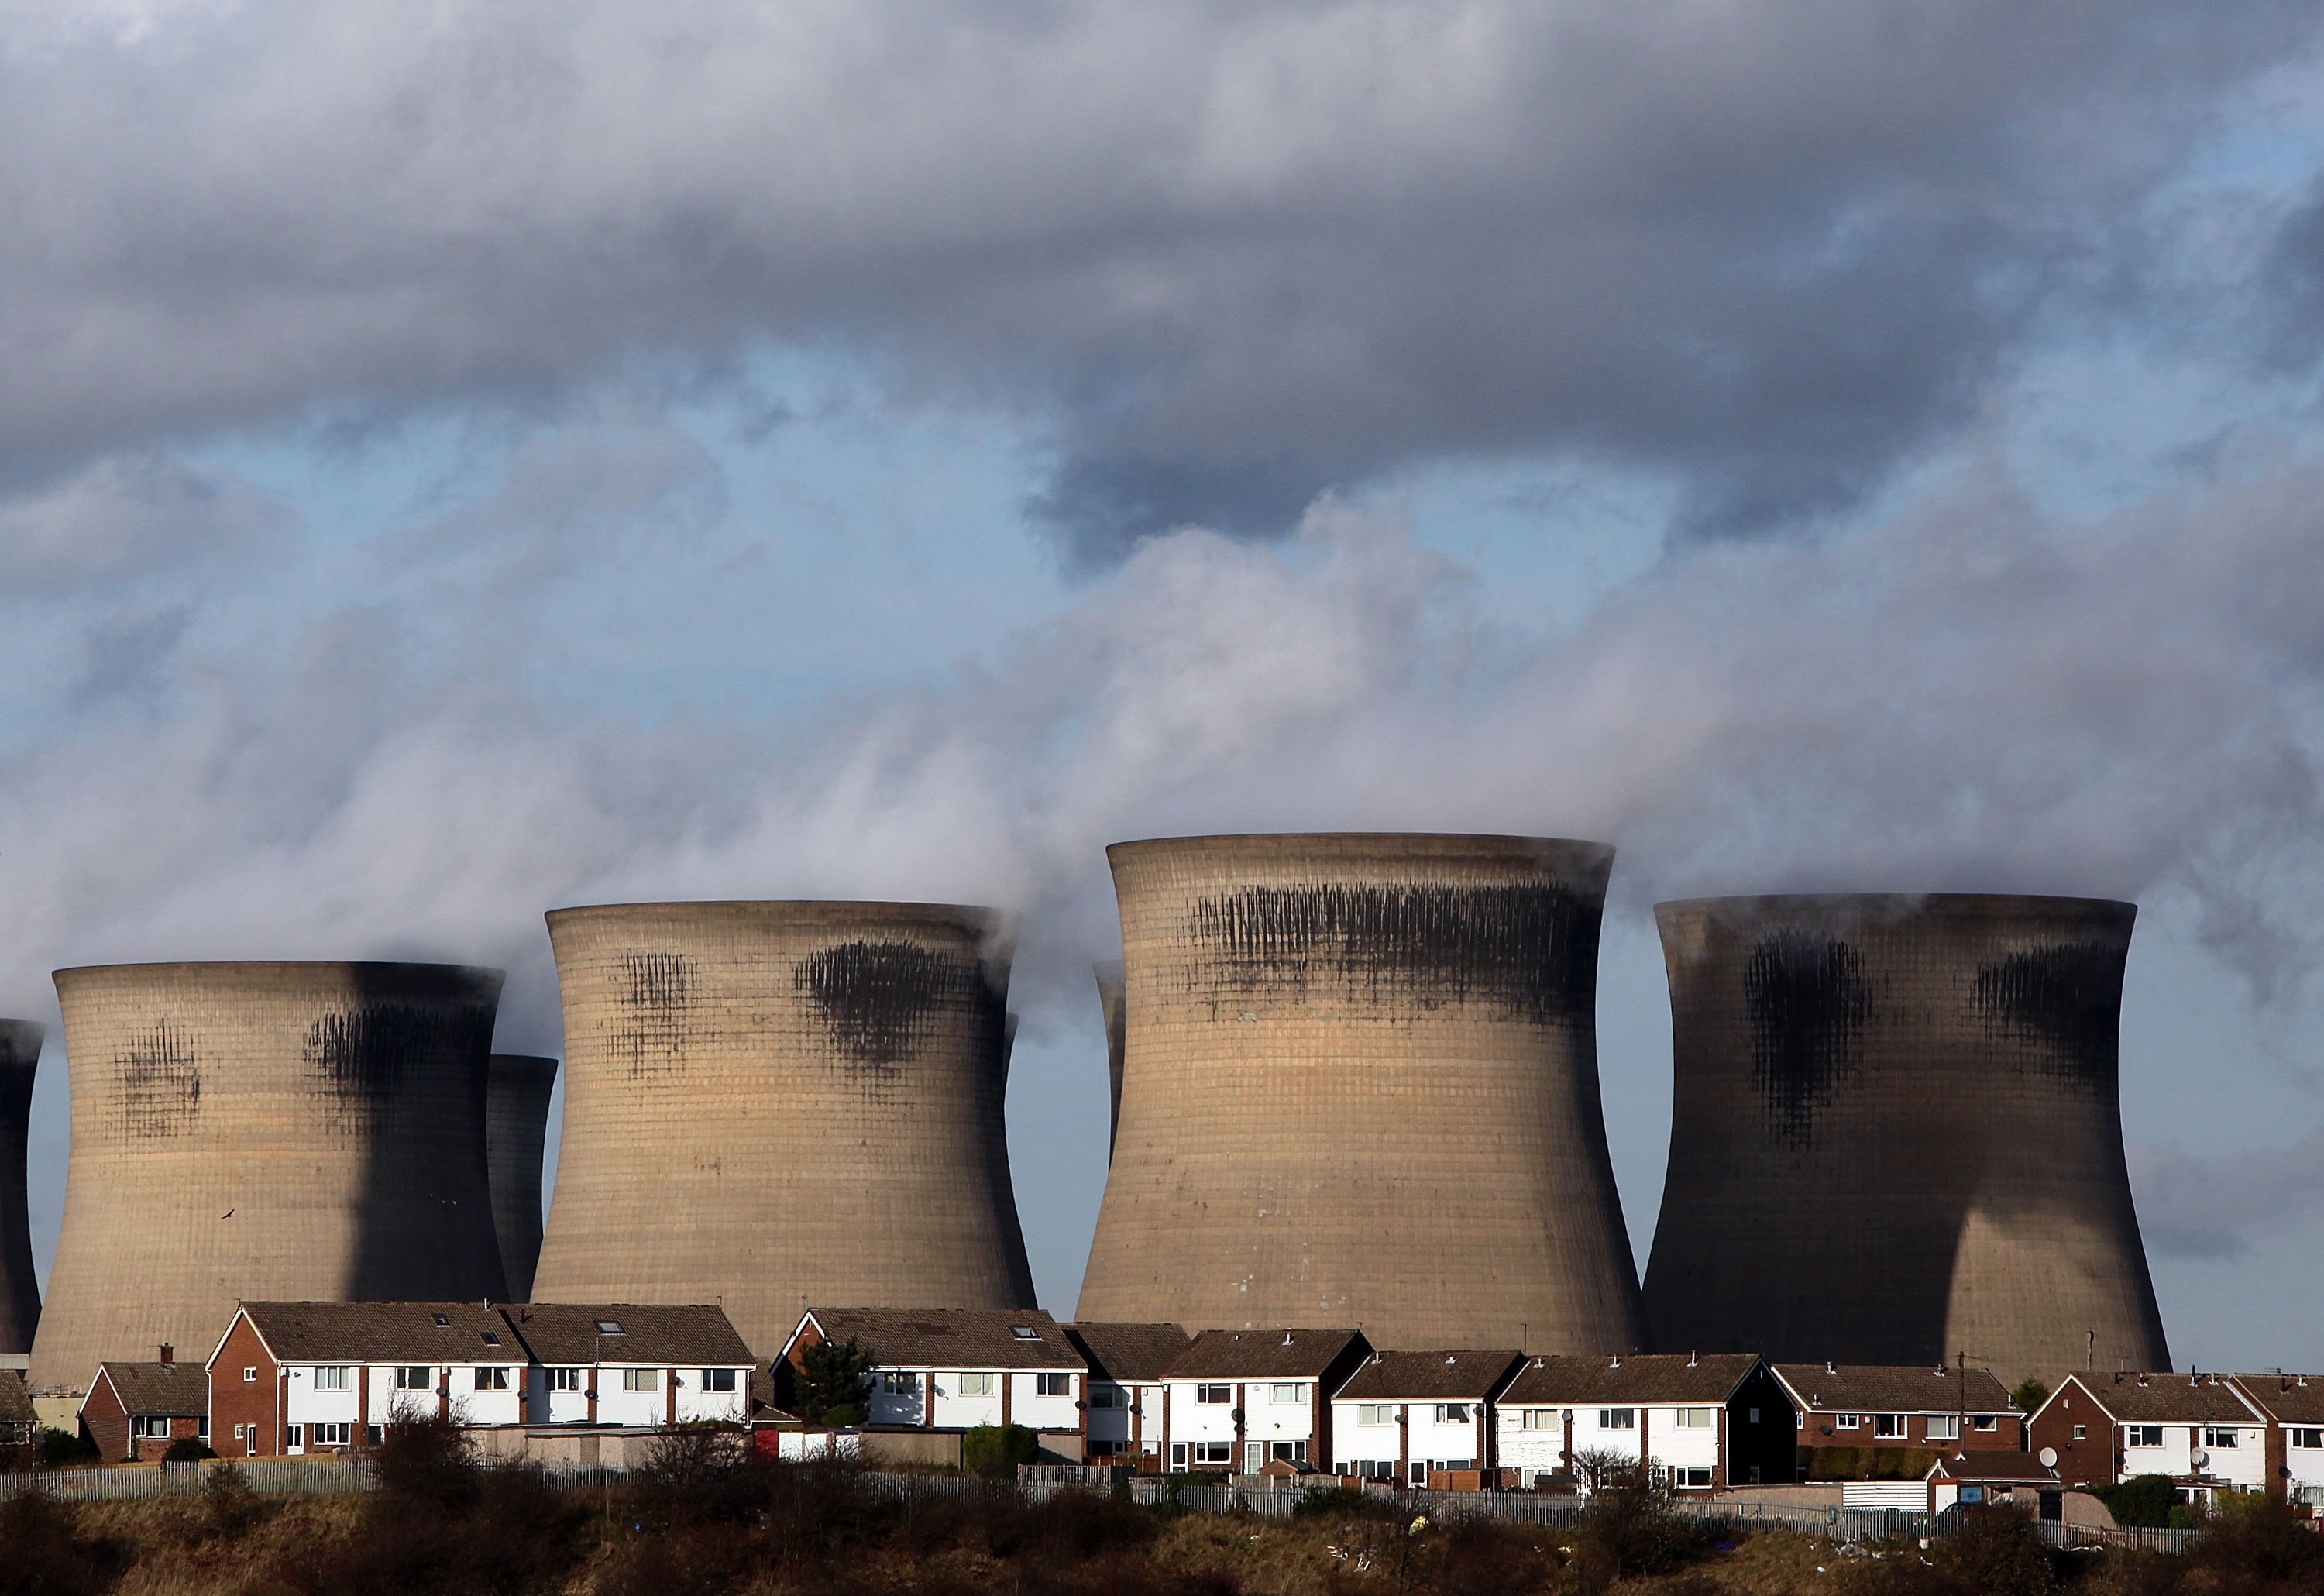 The coal fueled Ferrybridge power station as it generates electricity on November 17, 2009 in Ferrybridge, United Kingdom. (Christopher Furlong—Getty Images)